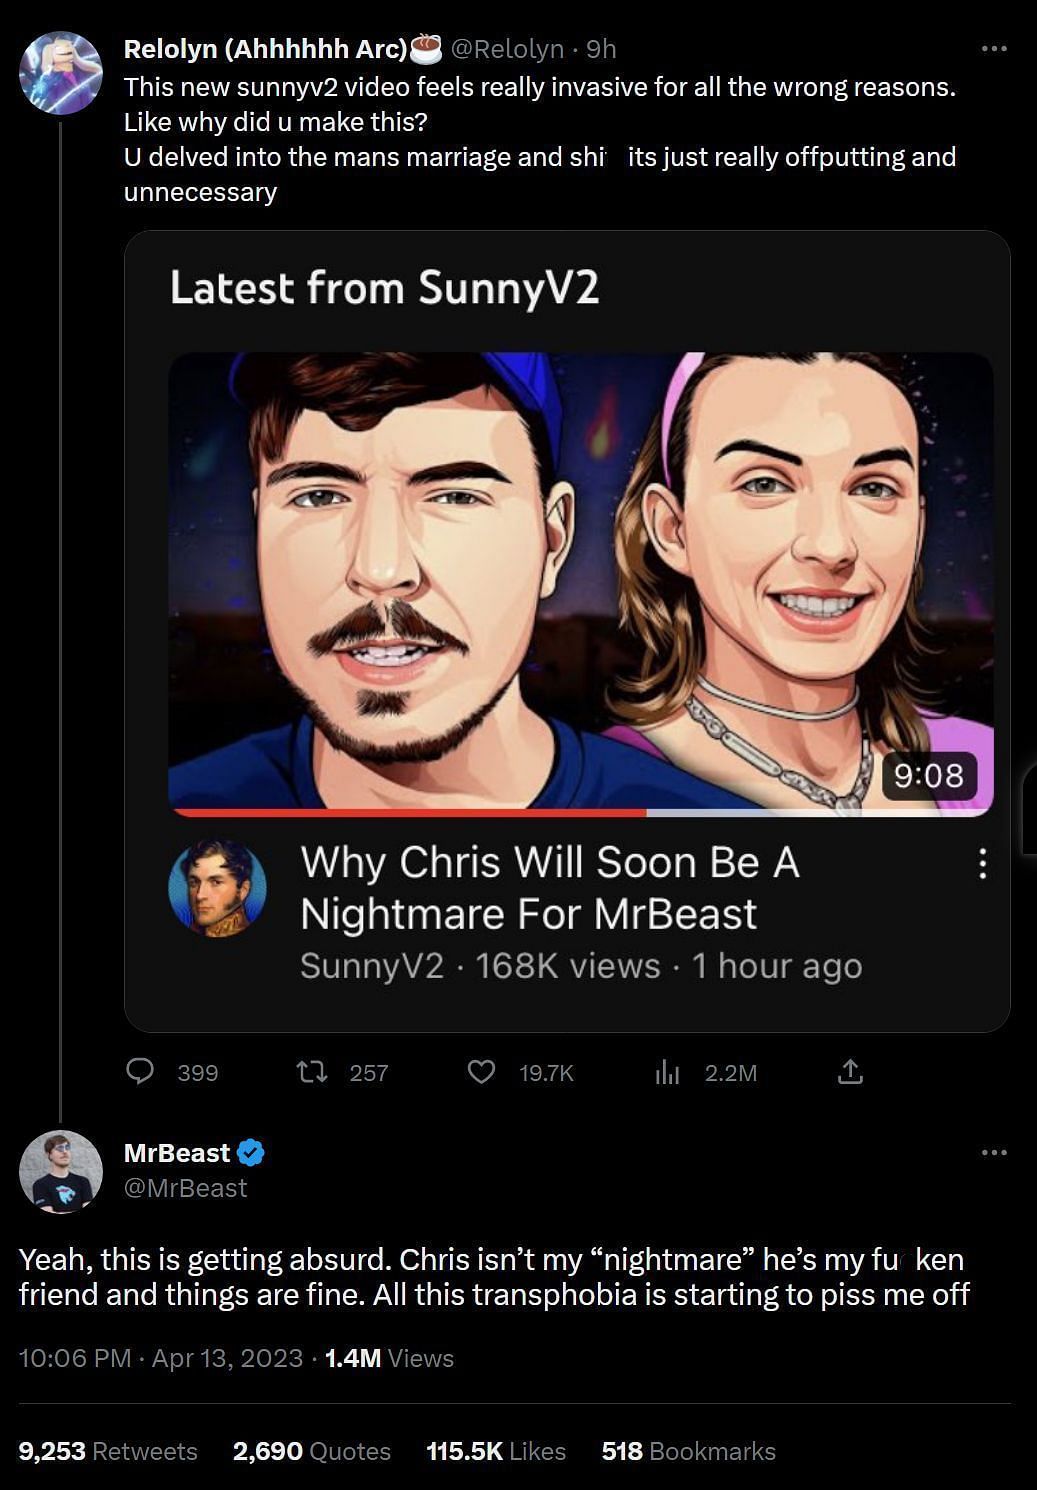 MrBeast comes out fighting for  sidekick Chris Tyson after critics  said he 'abandoned' son